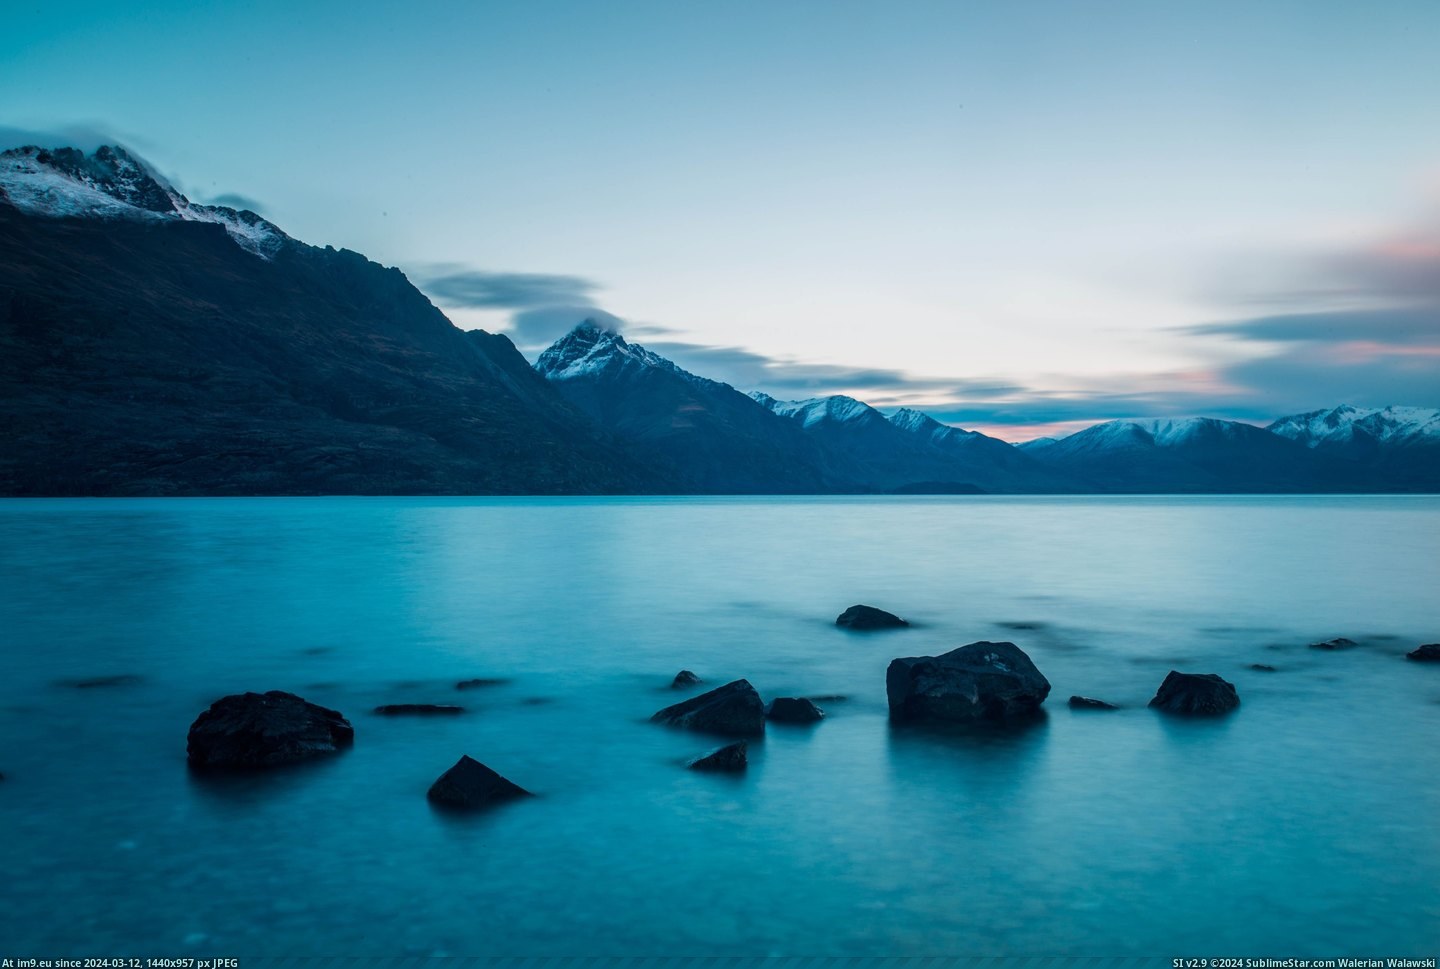 #Day #Hotel #Weeks #Minutes #Place #Zealand [Earthporn] I went to New Zealand for 2 weeks and found this place 5 minutes from my hotel on my last day there [5440x3627][OC] Pic. (Obraz z album My r/EARTHPORN favs))